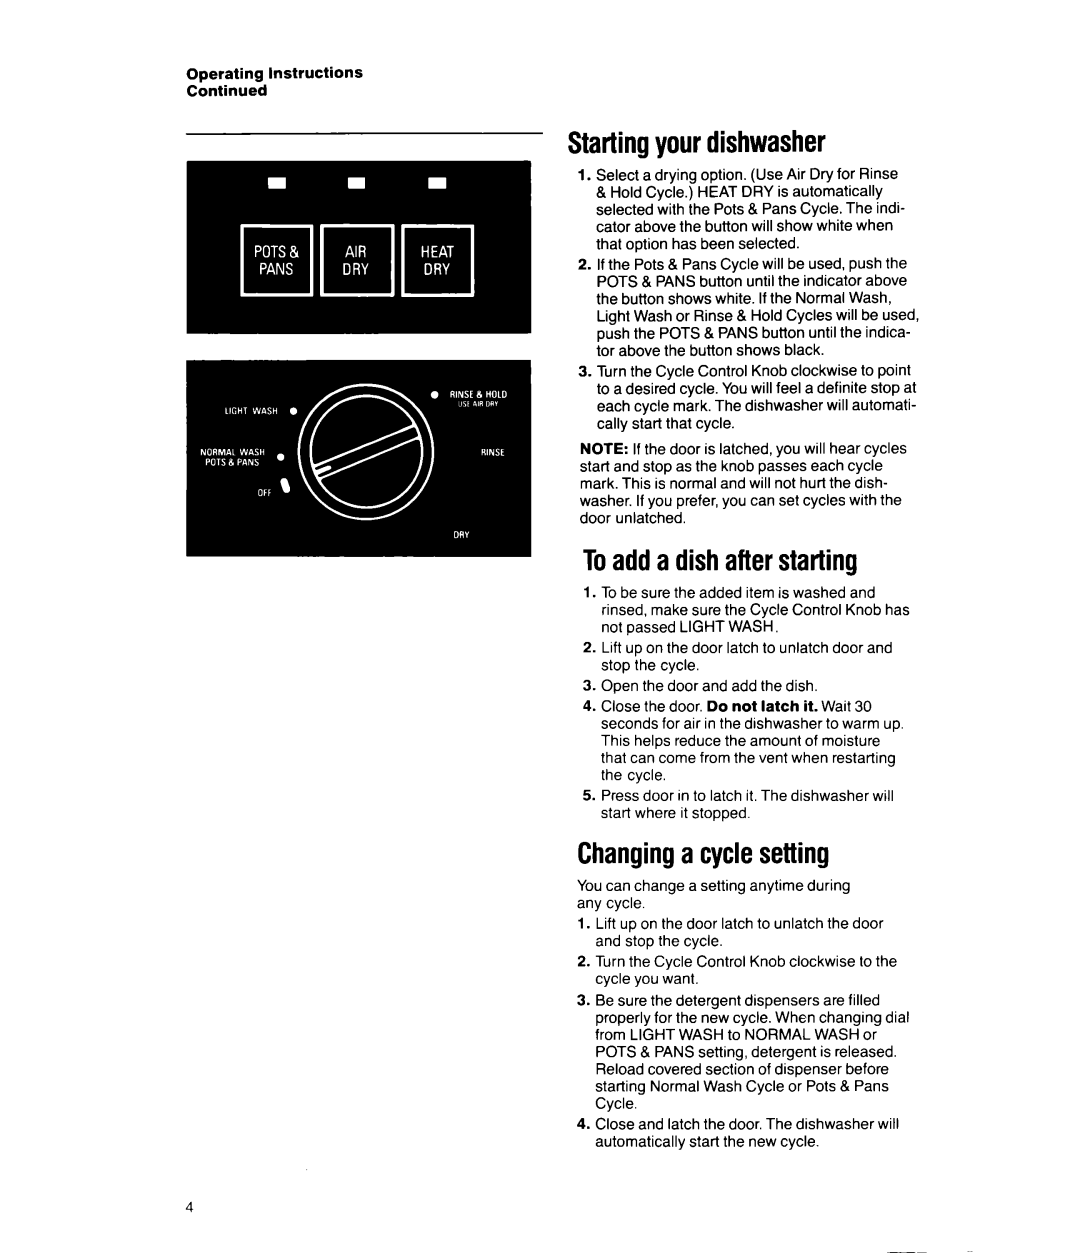 Whirlpool DP8350XV manual Startingyour dishwasher, Toadd a dish after starting, Changinga cyclesetting 